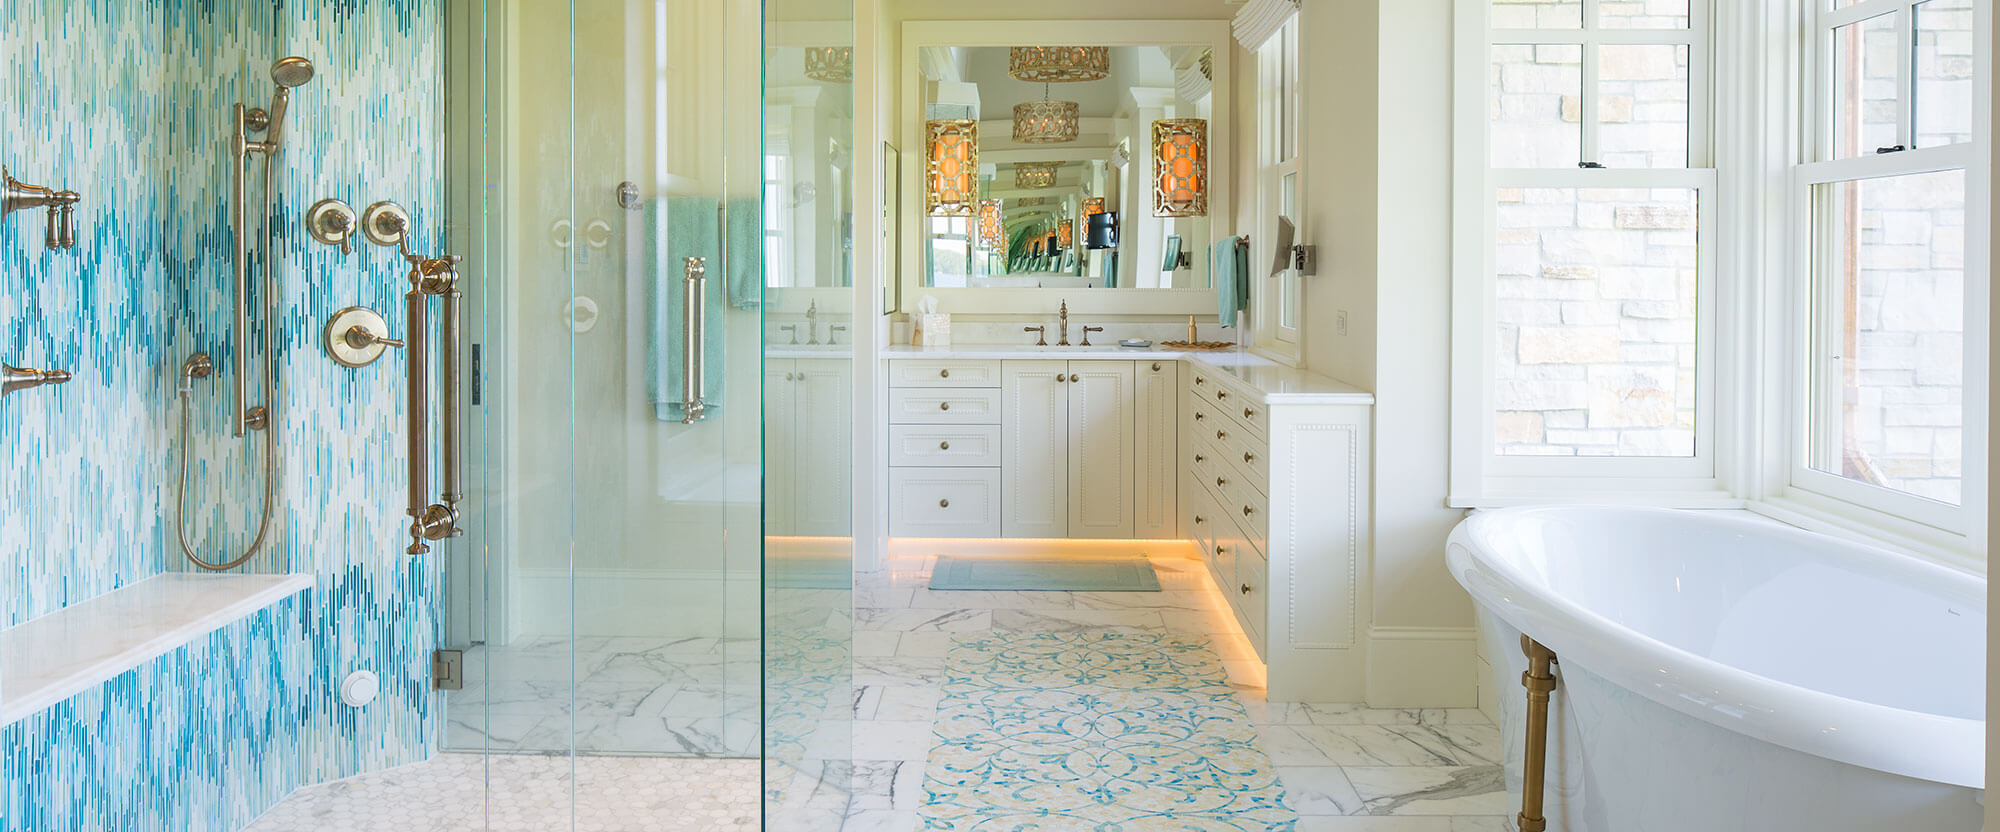 Tile X Design bathroom tiling in a Twin Cities home